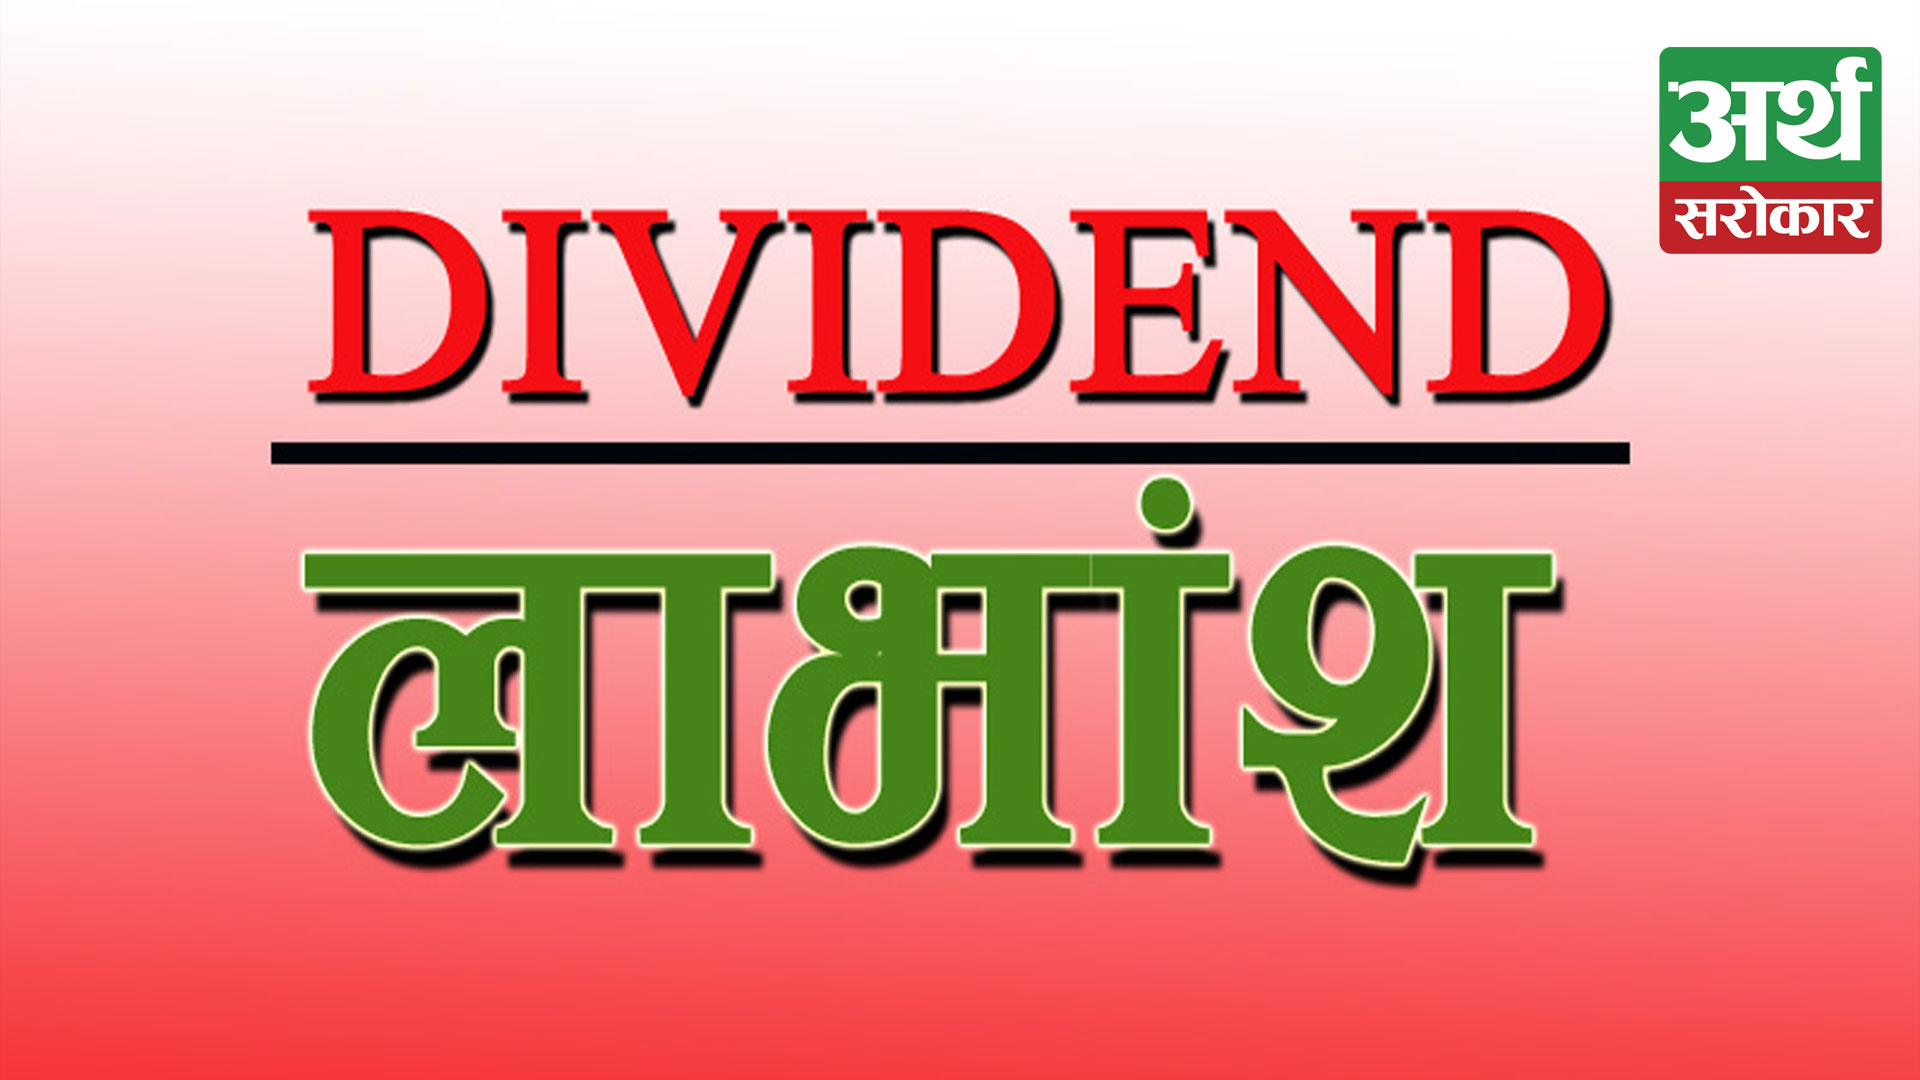 Janautthan Community Microfinance is to distribute 52% dividend to their share holders